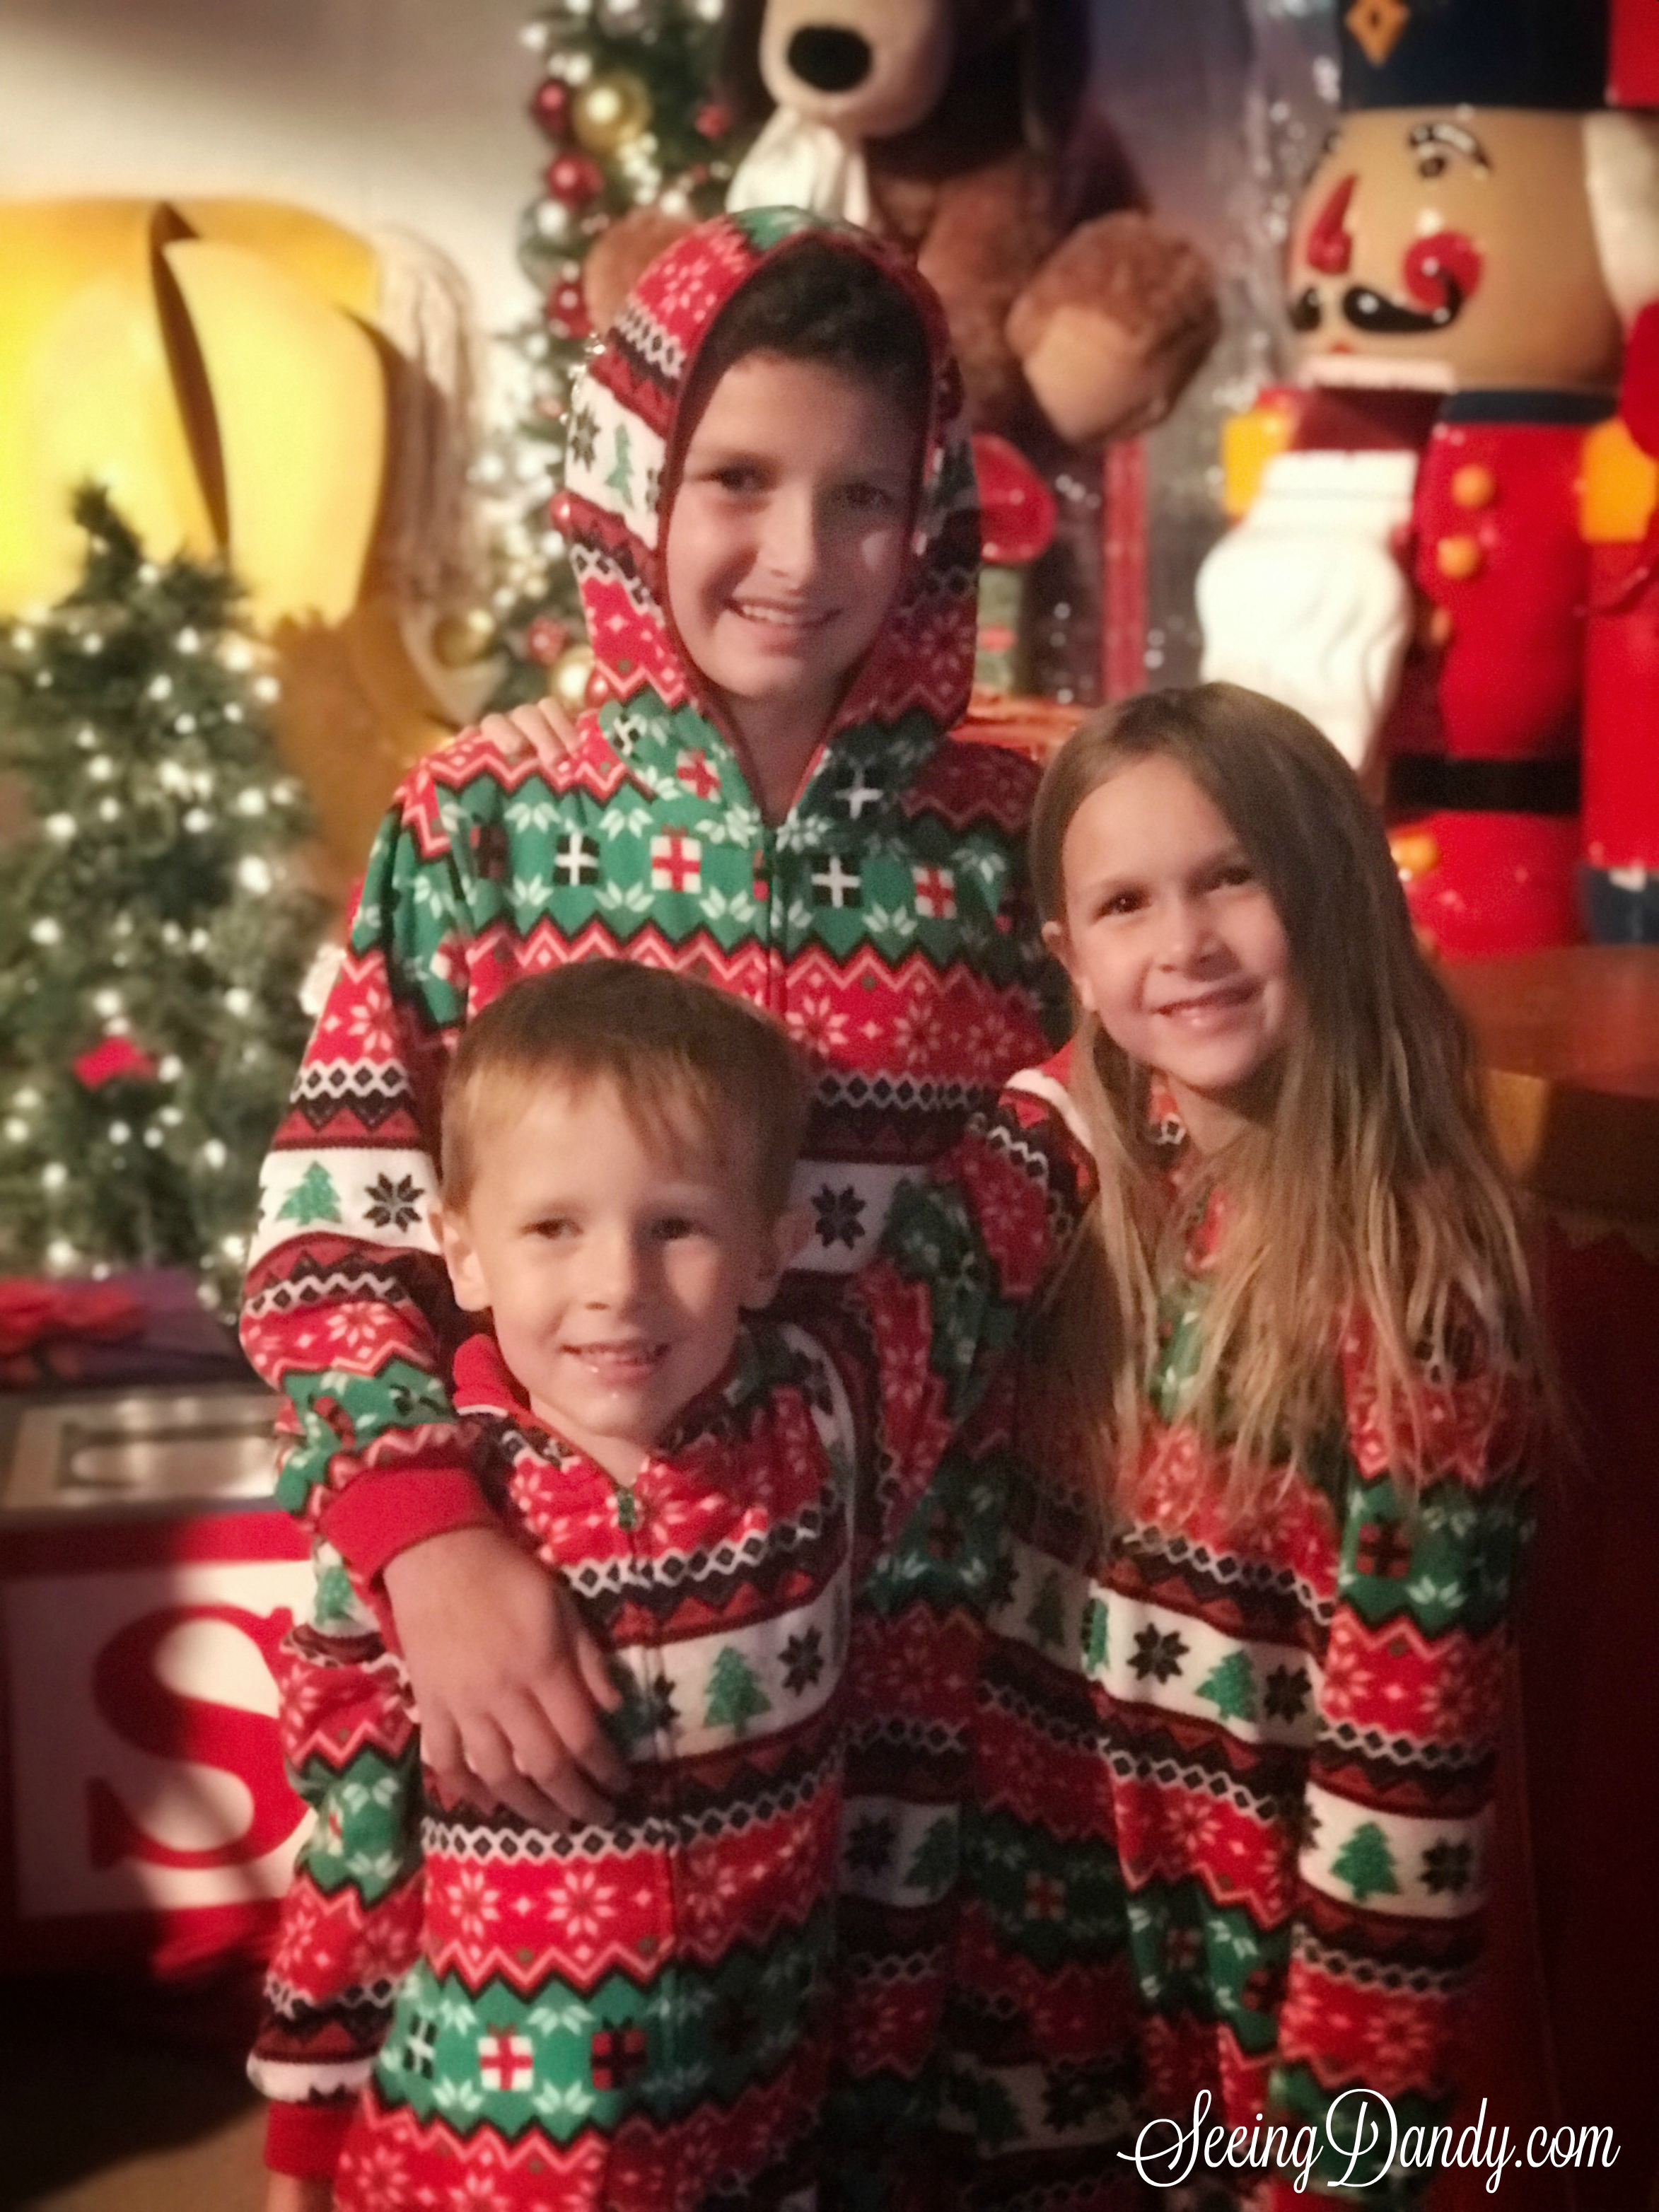 Kids love Polar Express tickets with Nutcracker themed Christmas decorations.